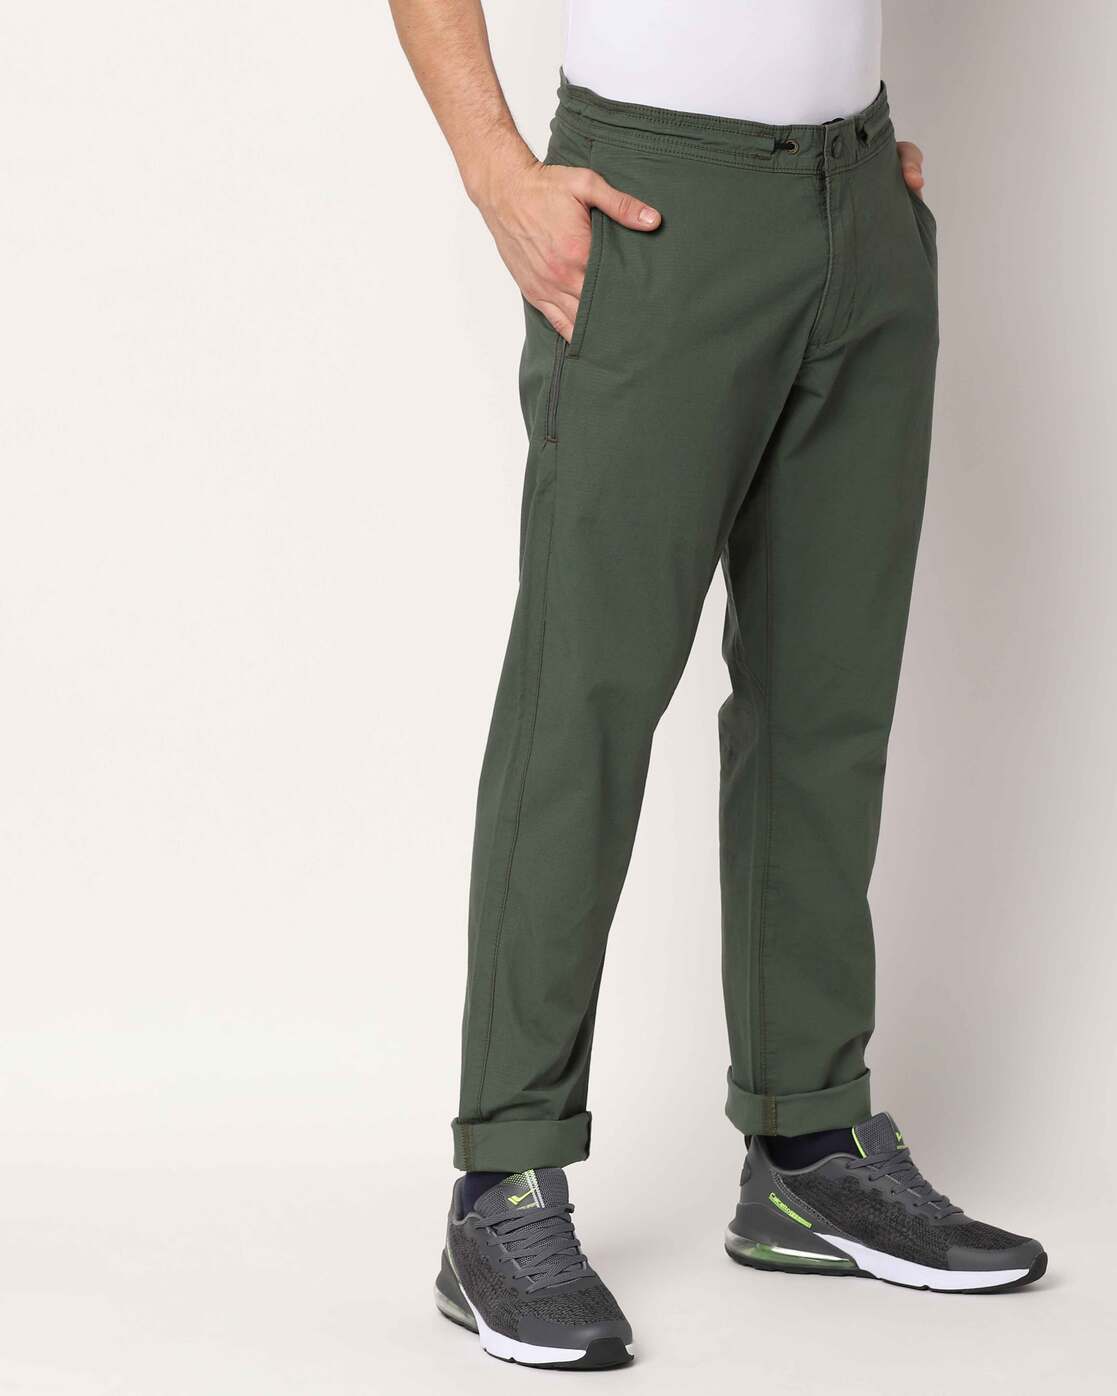 Buy Olive Green Track Pants for Men by DENIZEN FROM LEVIS Online 